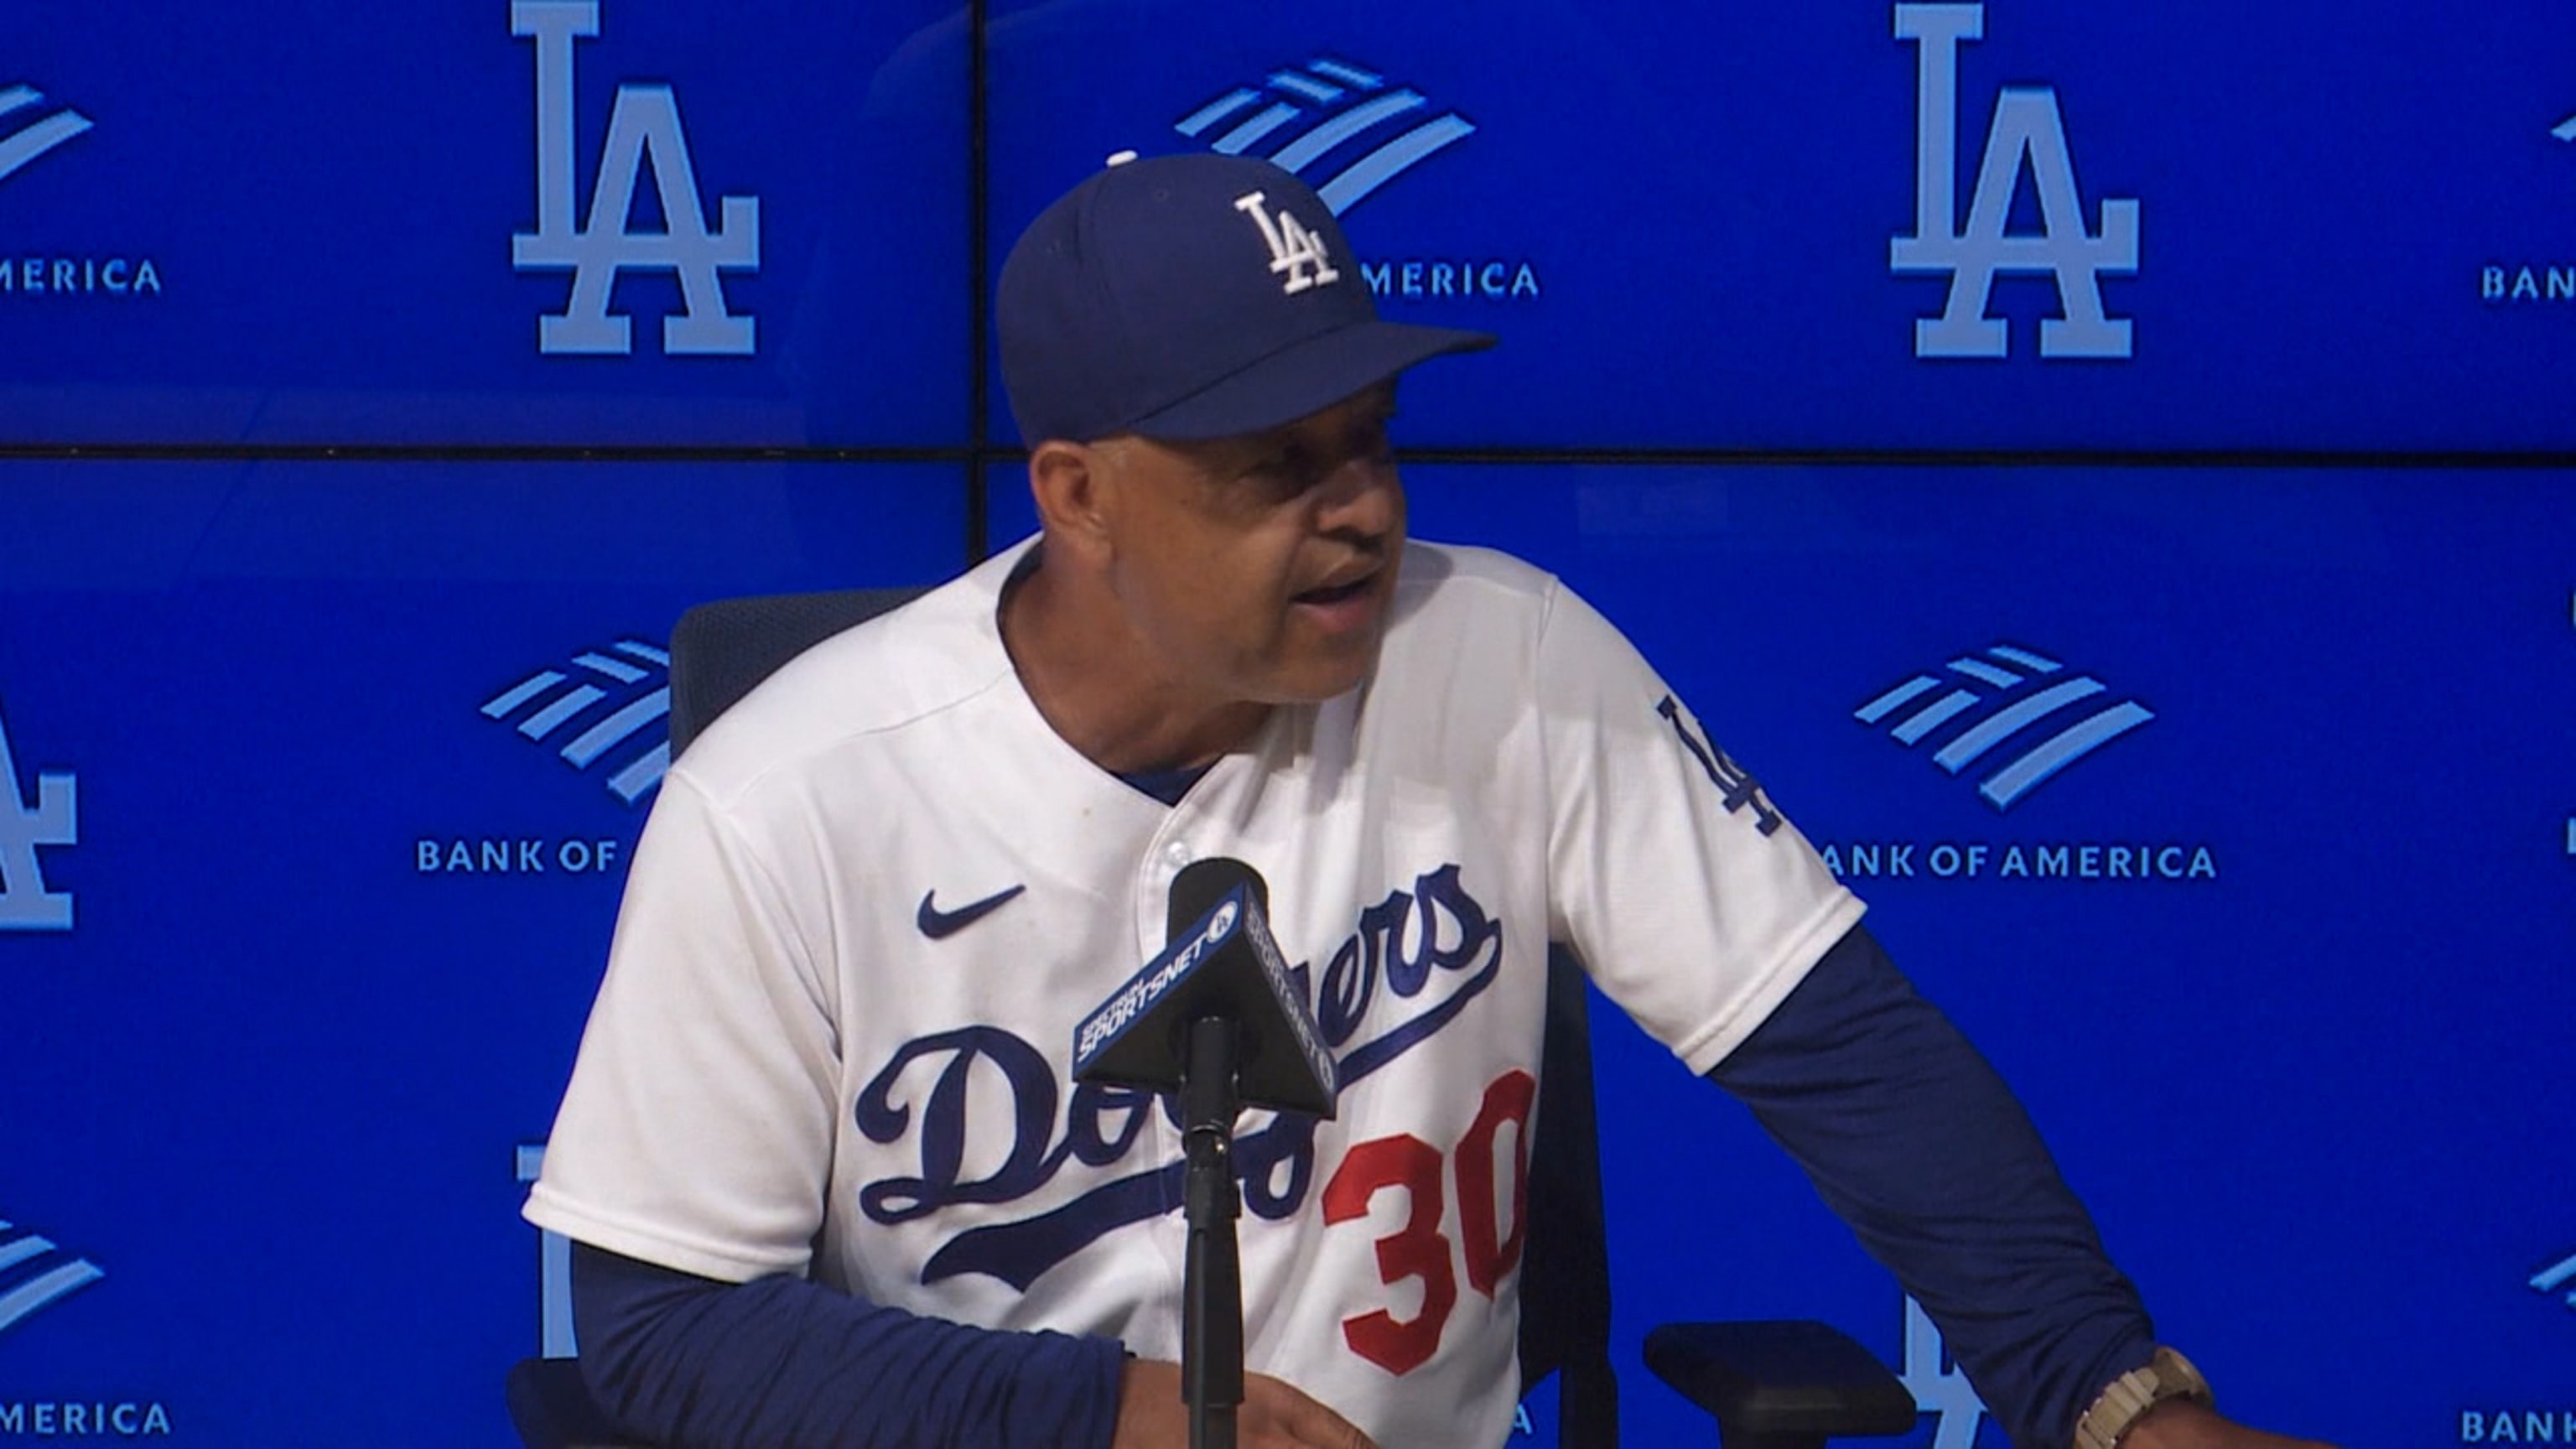 MLB Lockout Is Keeping Dave Roberts from Managing, but He Gets to